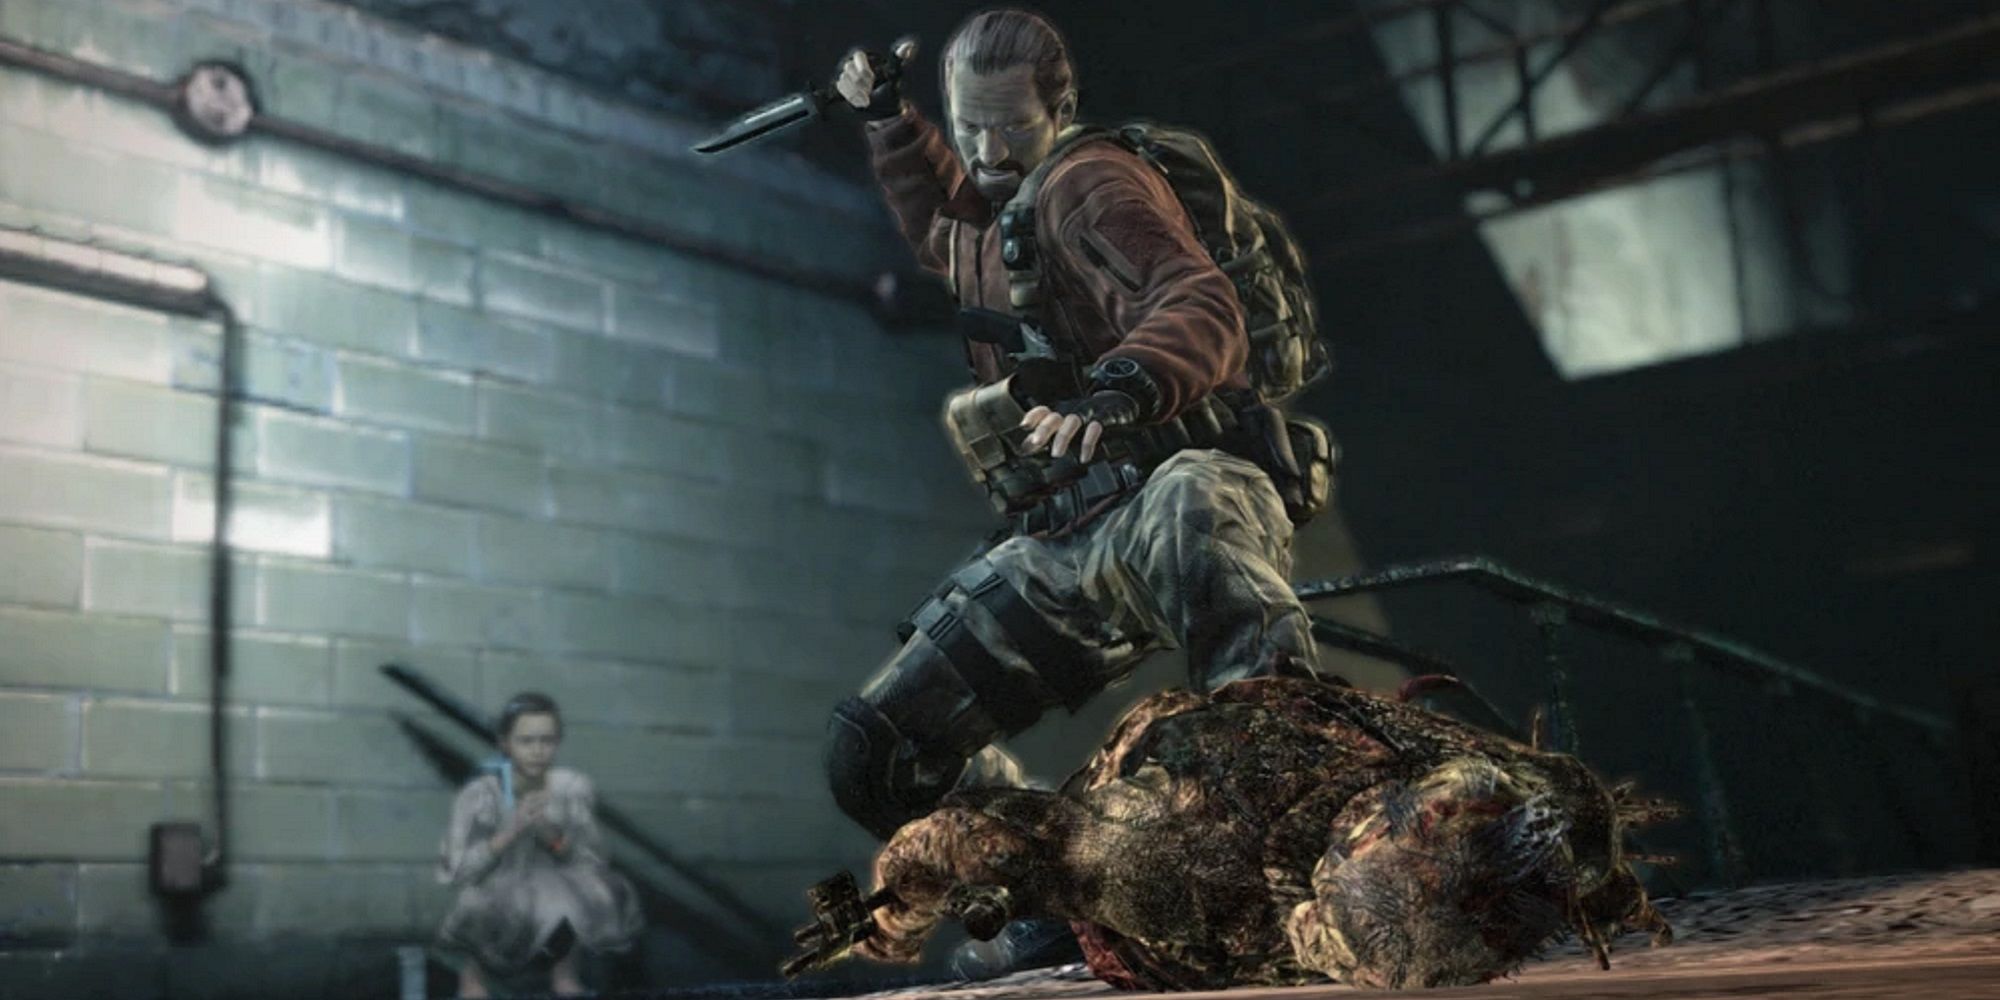 Barry finishes an enemy with his knife in Resident Evil Revelations 2 while Natalia hides behind him